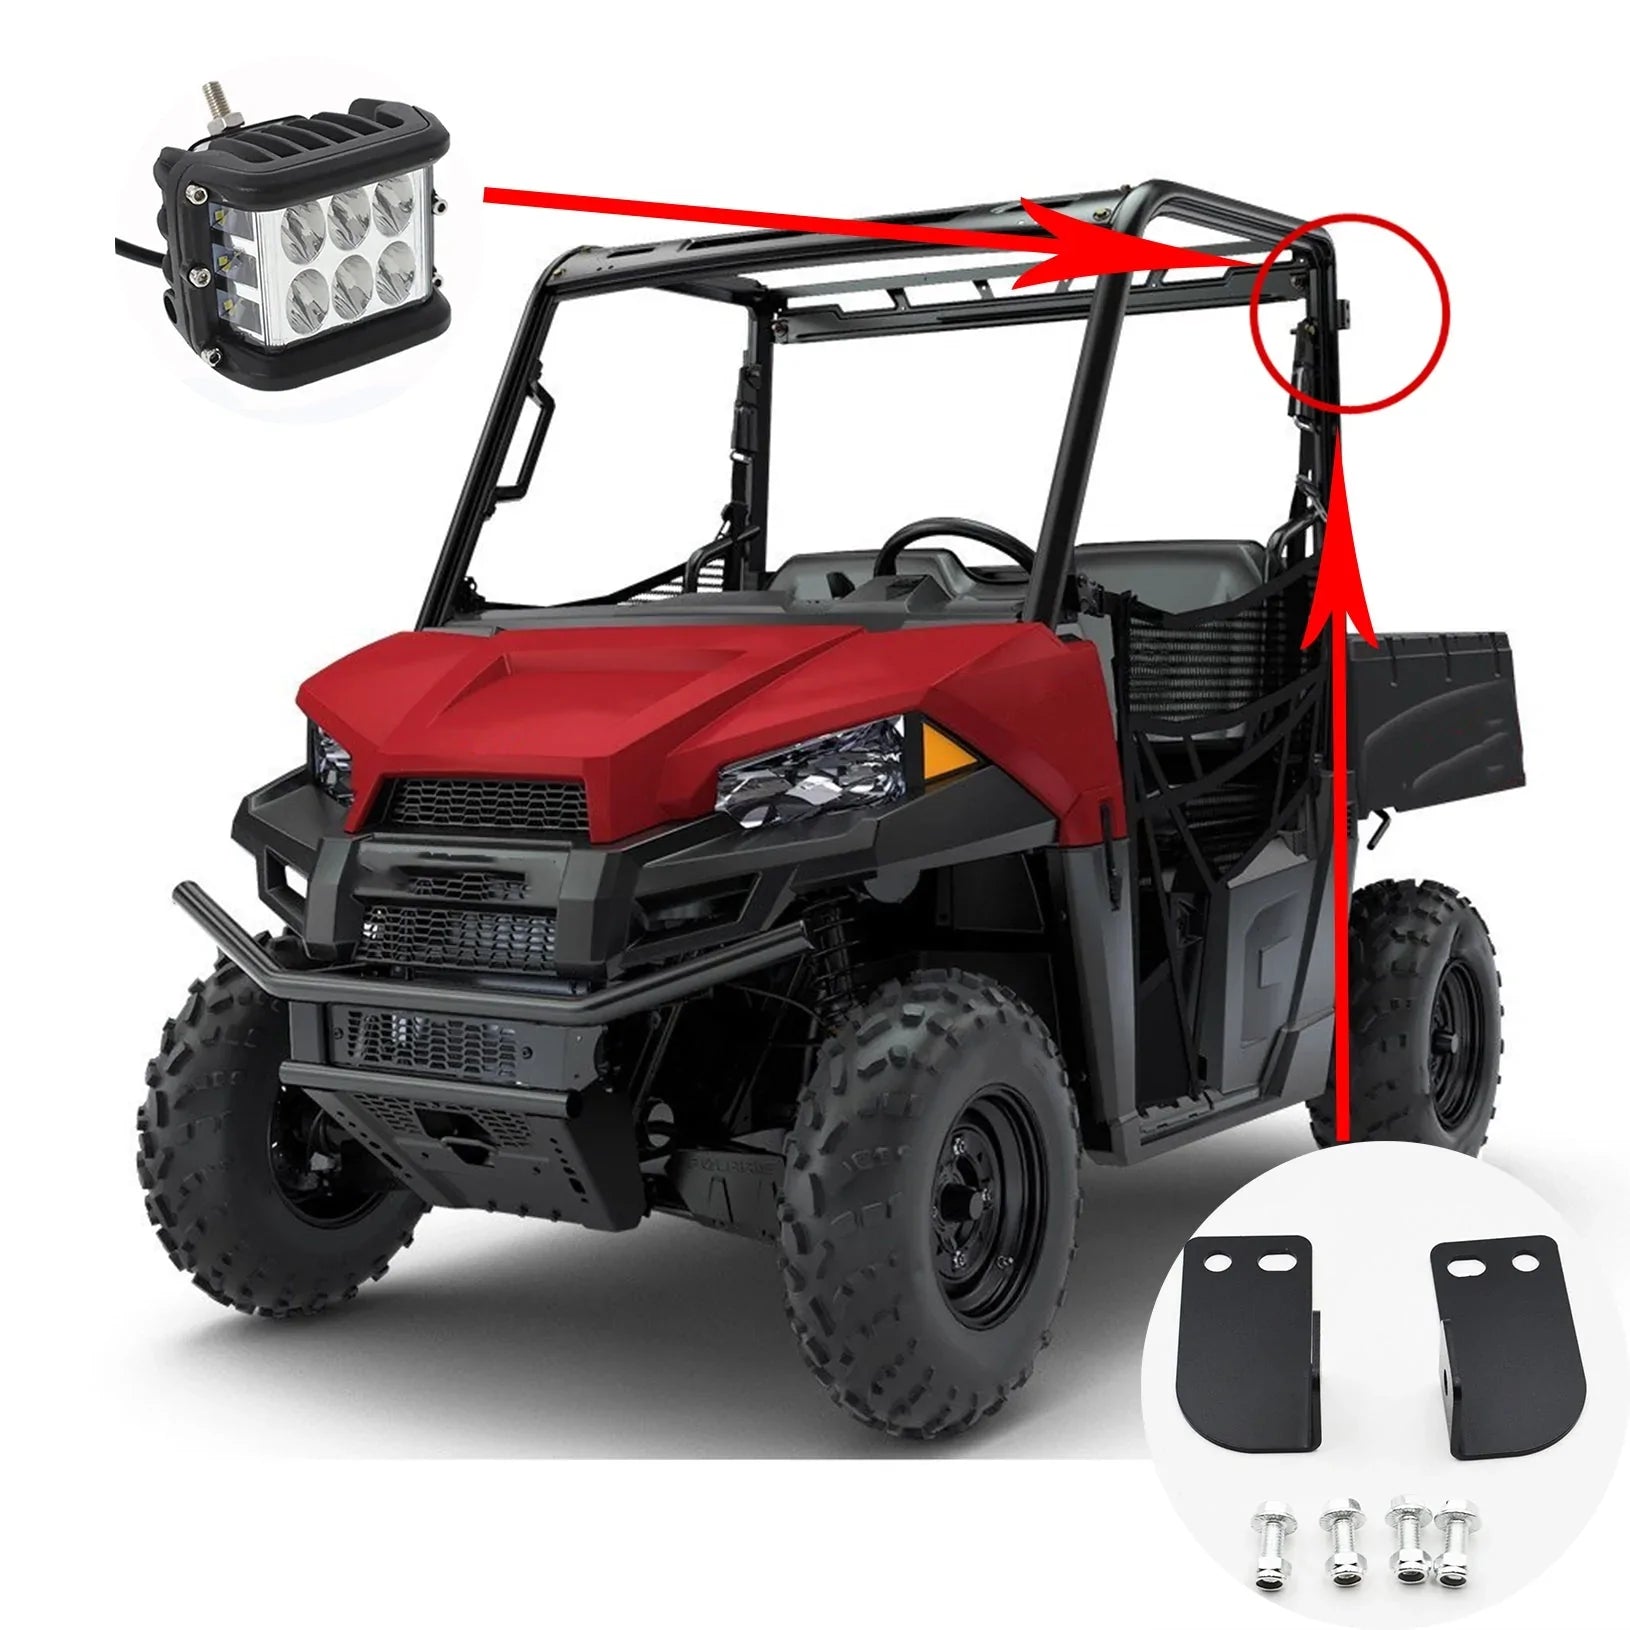 labwork Reverse Rear Backup 60w 4 Inch Led Light Bar with Bracket Mount and Wire Replacement for Polaris Ranger 400 425 500 570 700 800 900 1000 LAB WORK MOTO